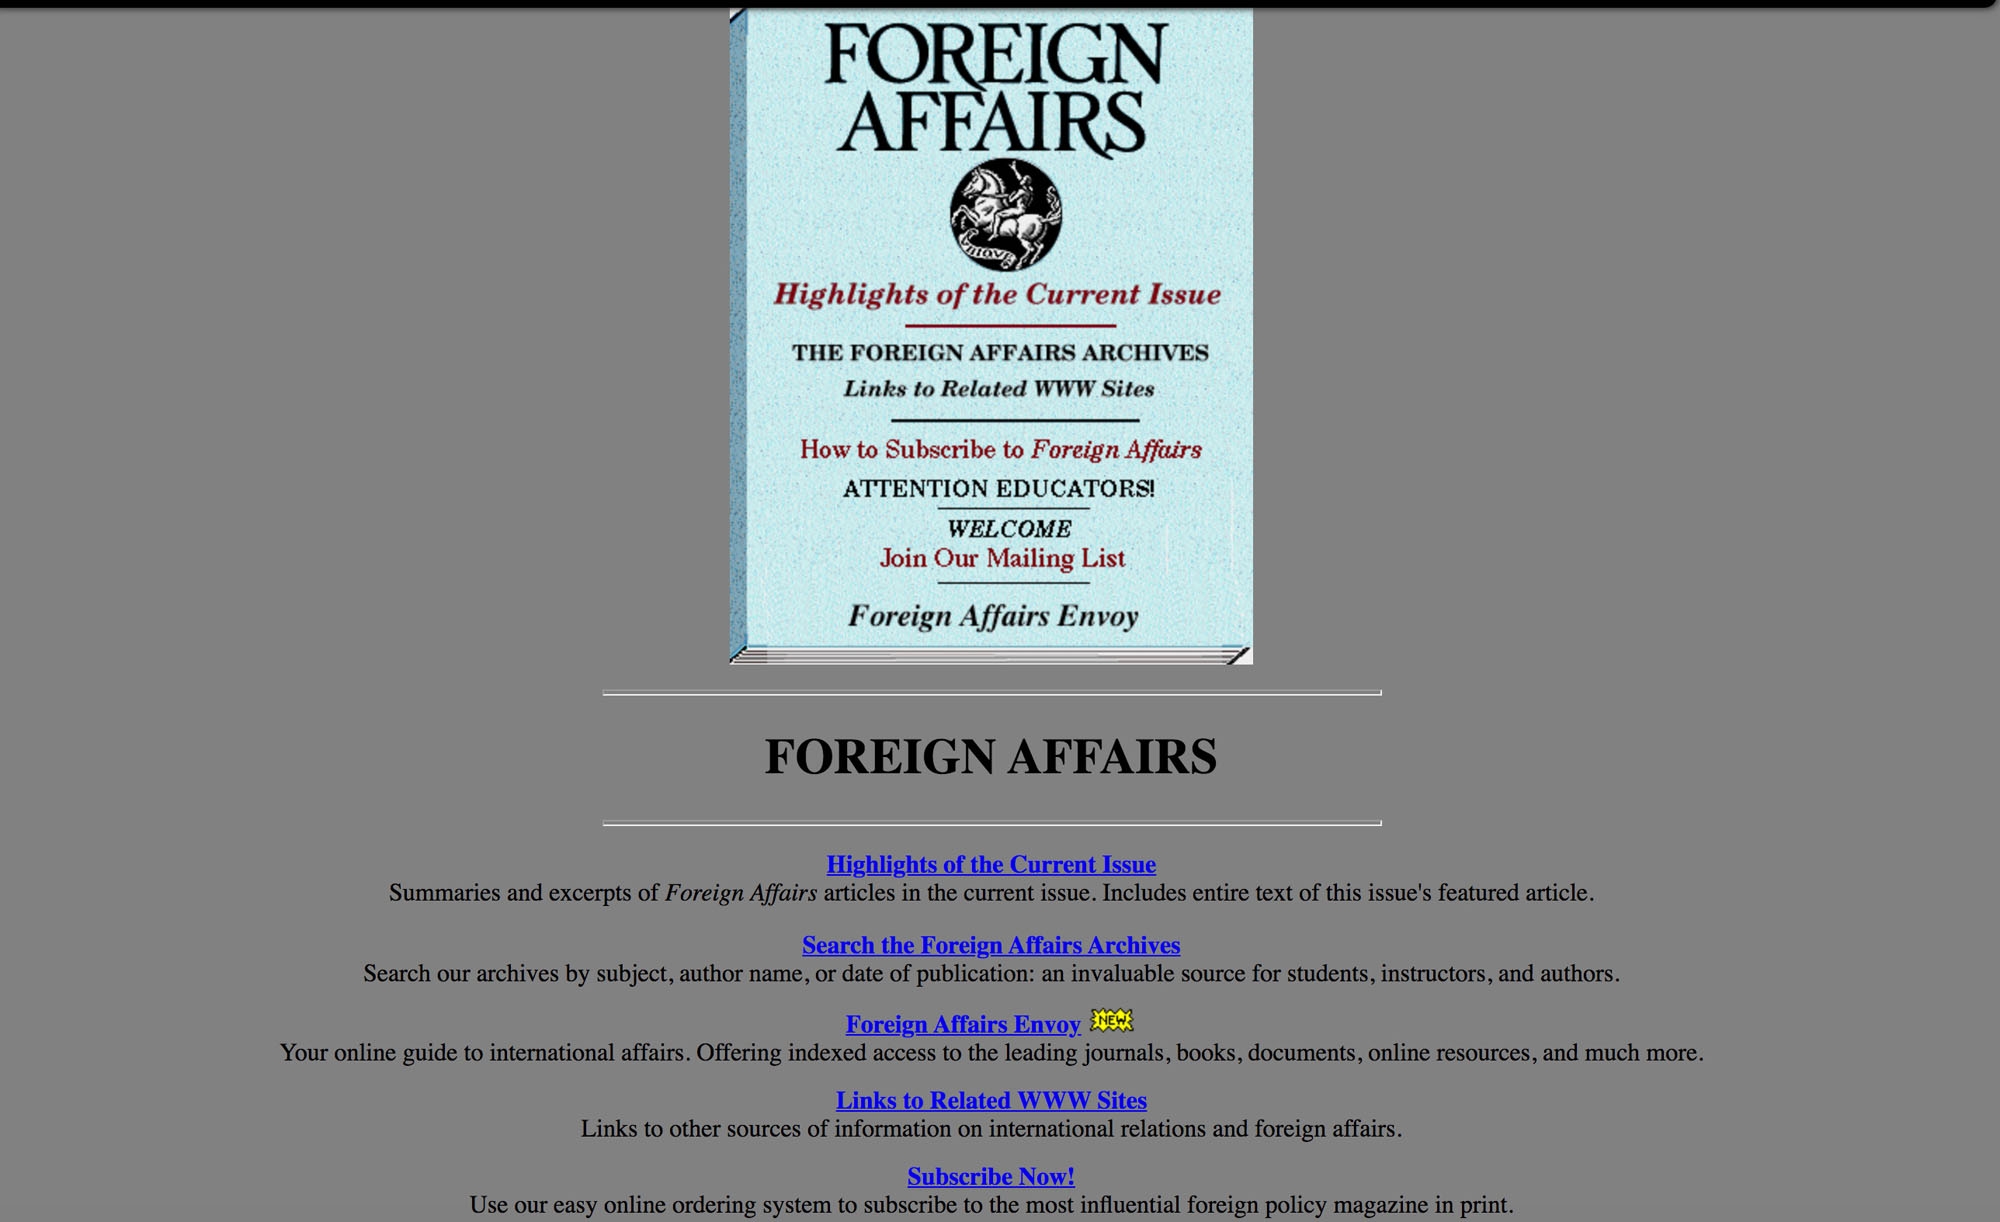 <span class='italics'>Foreign Affairs</span> launches its website, foreignaffairs.org